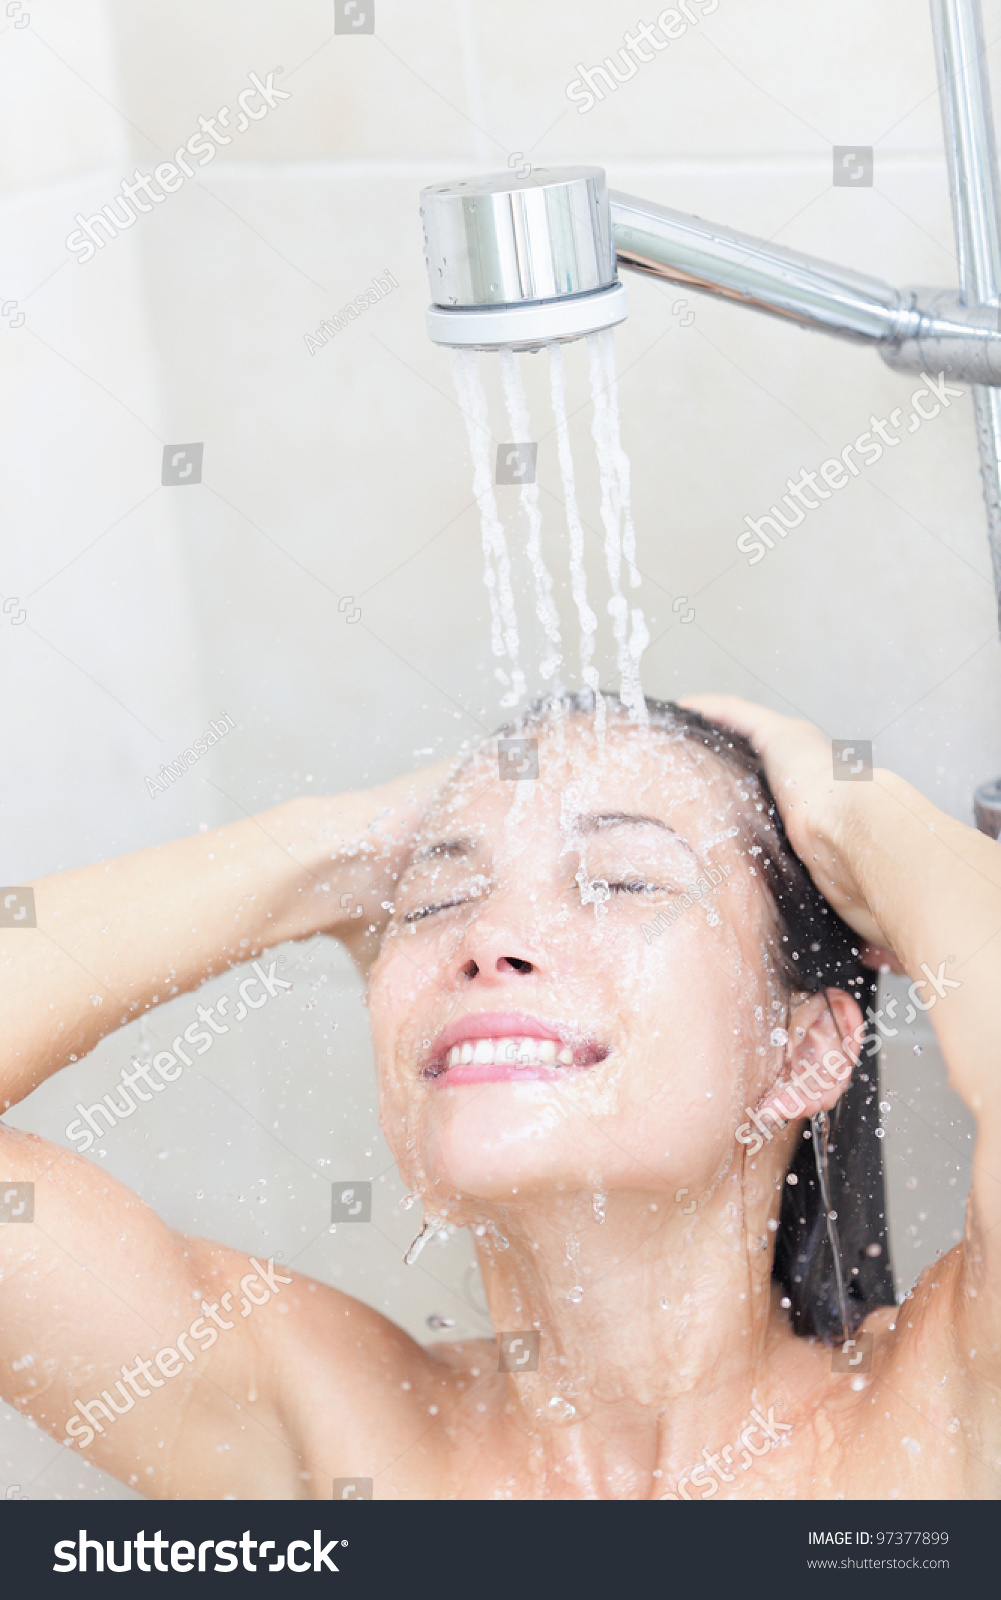 Shower Woman Washing Face And Hair Smiling Happy Showering Under Shower